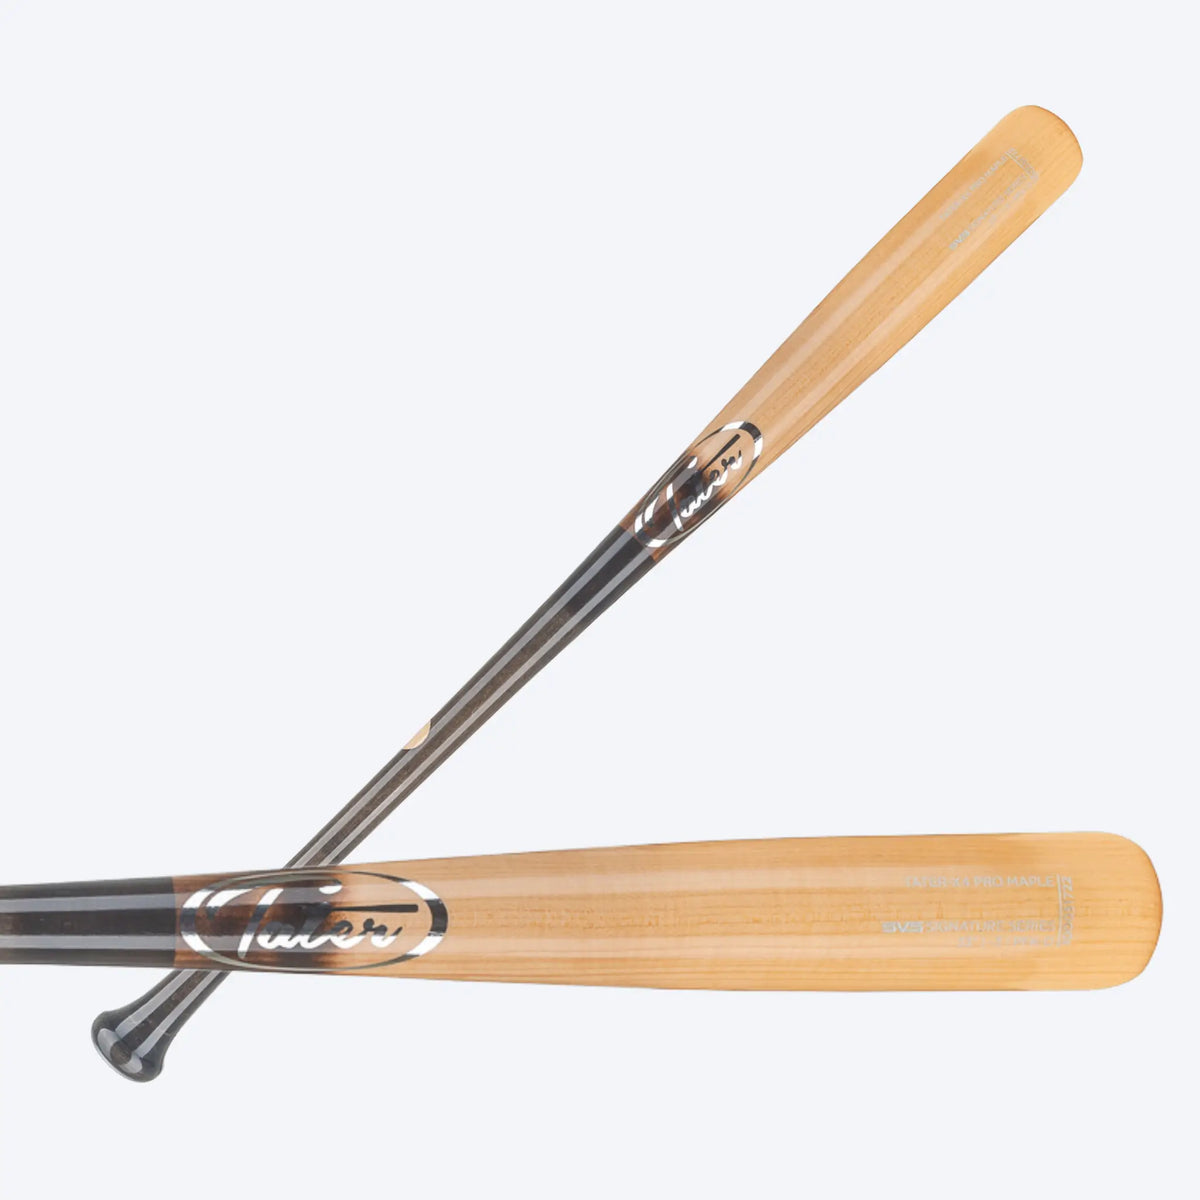 A composite image displaying two Tater X4 Pro Maple bats in different orientations, one with a dark barrel and the other showcasing the natural wood finish. The bats are designed for a balanced feel, making them a solid choice for hitters seeking a quality Louisville Slugger alternative.